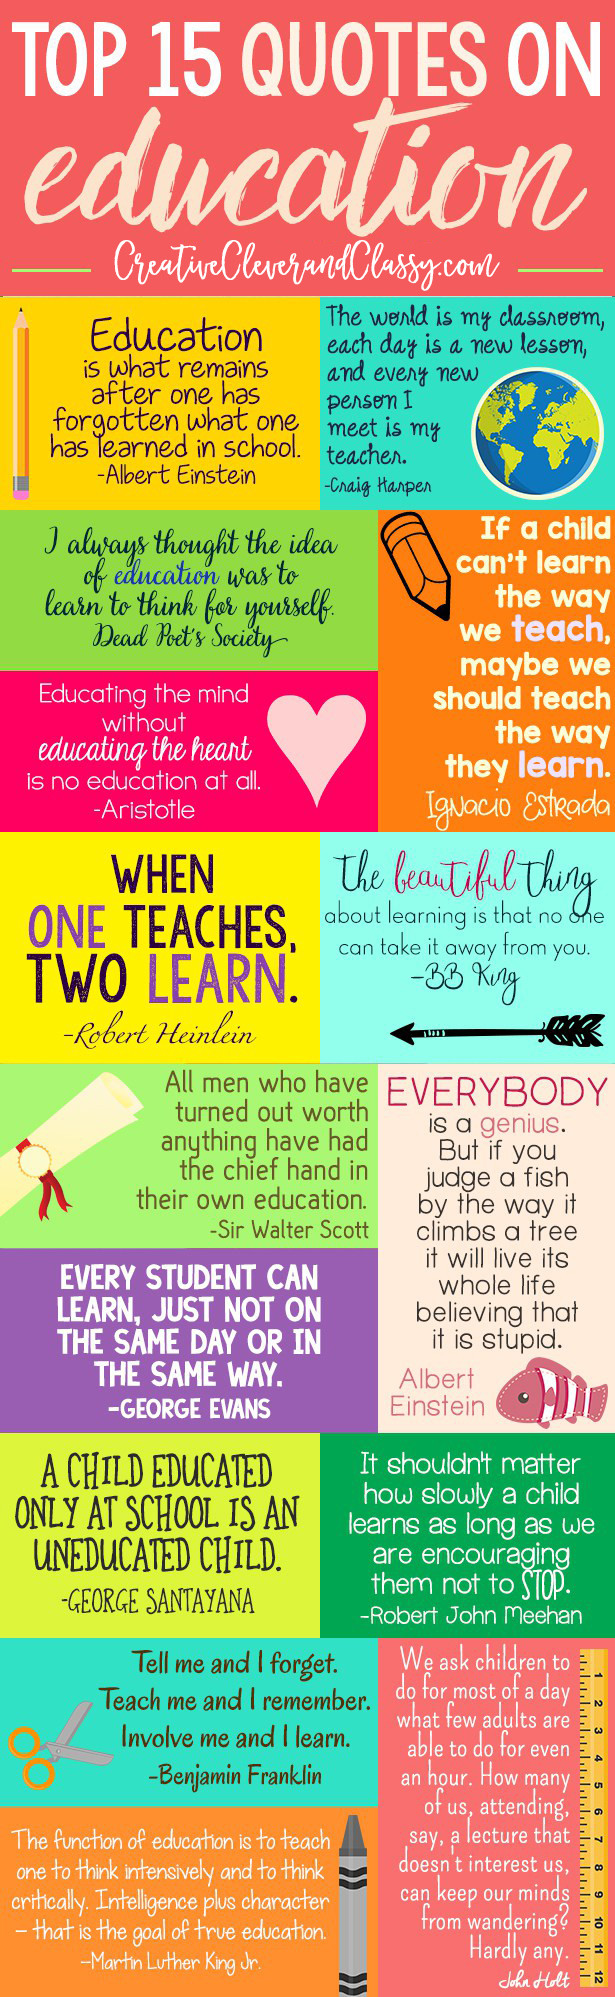 Children Educational Quotes
 Top 15 Quotes on Education for Homeschool or Teachers